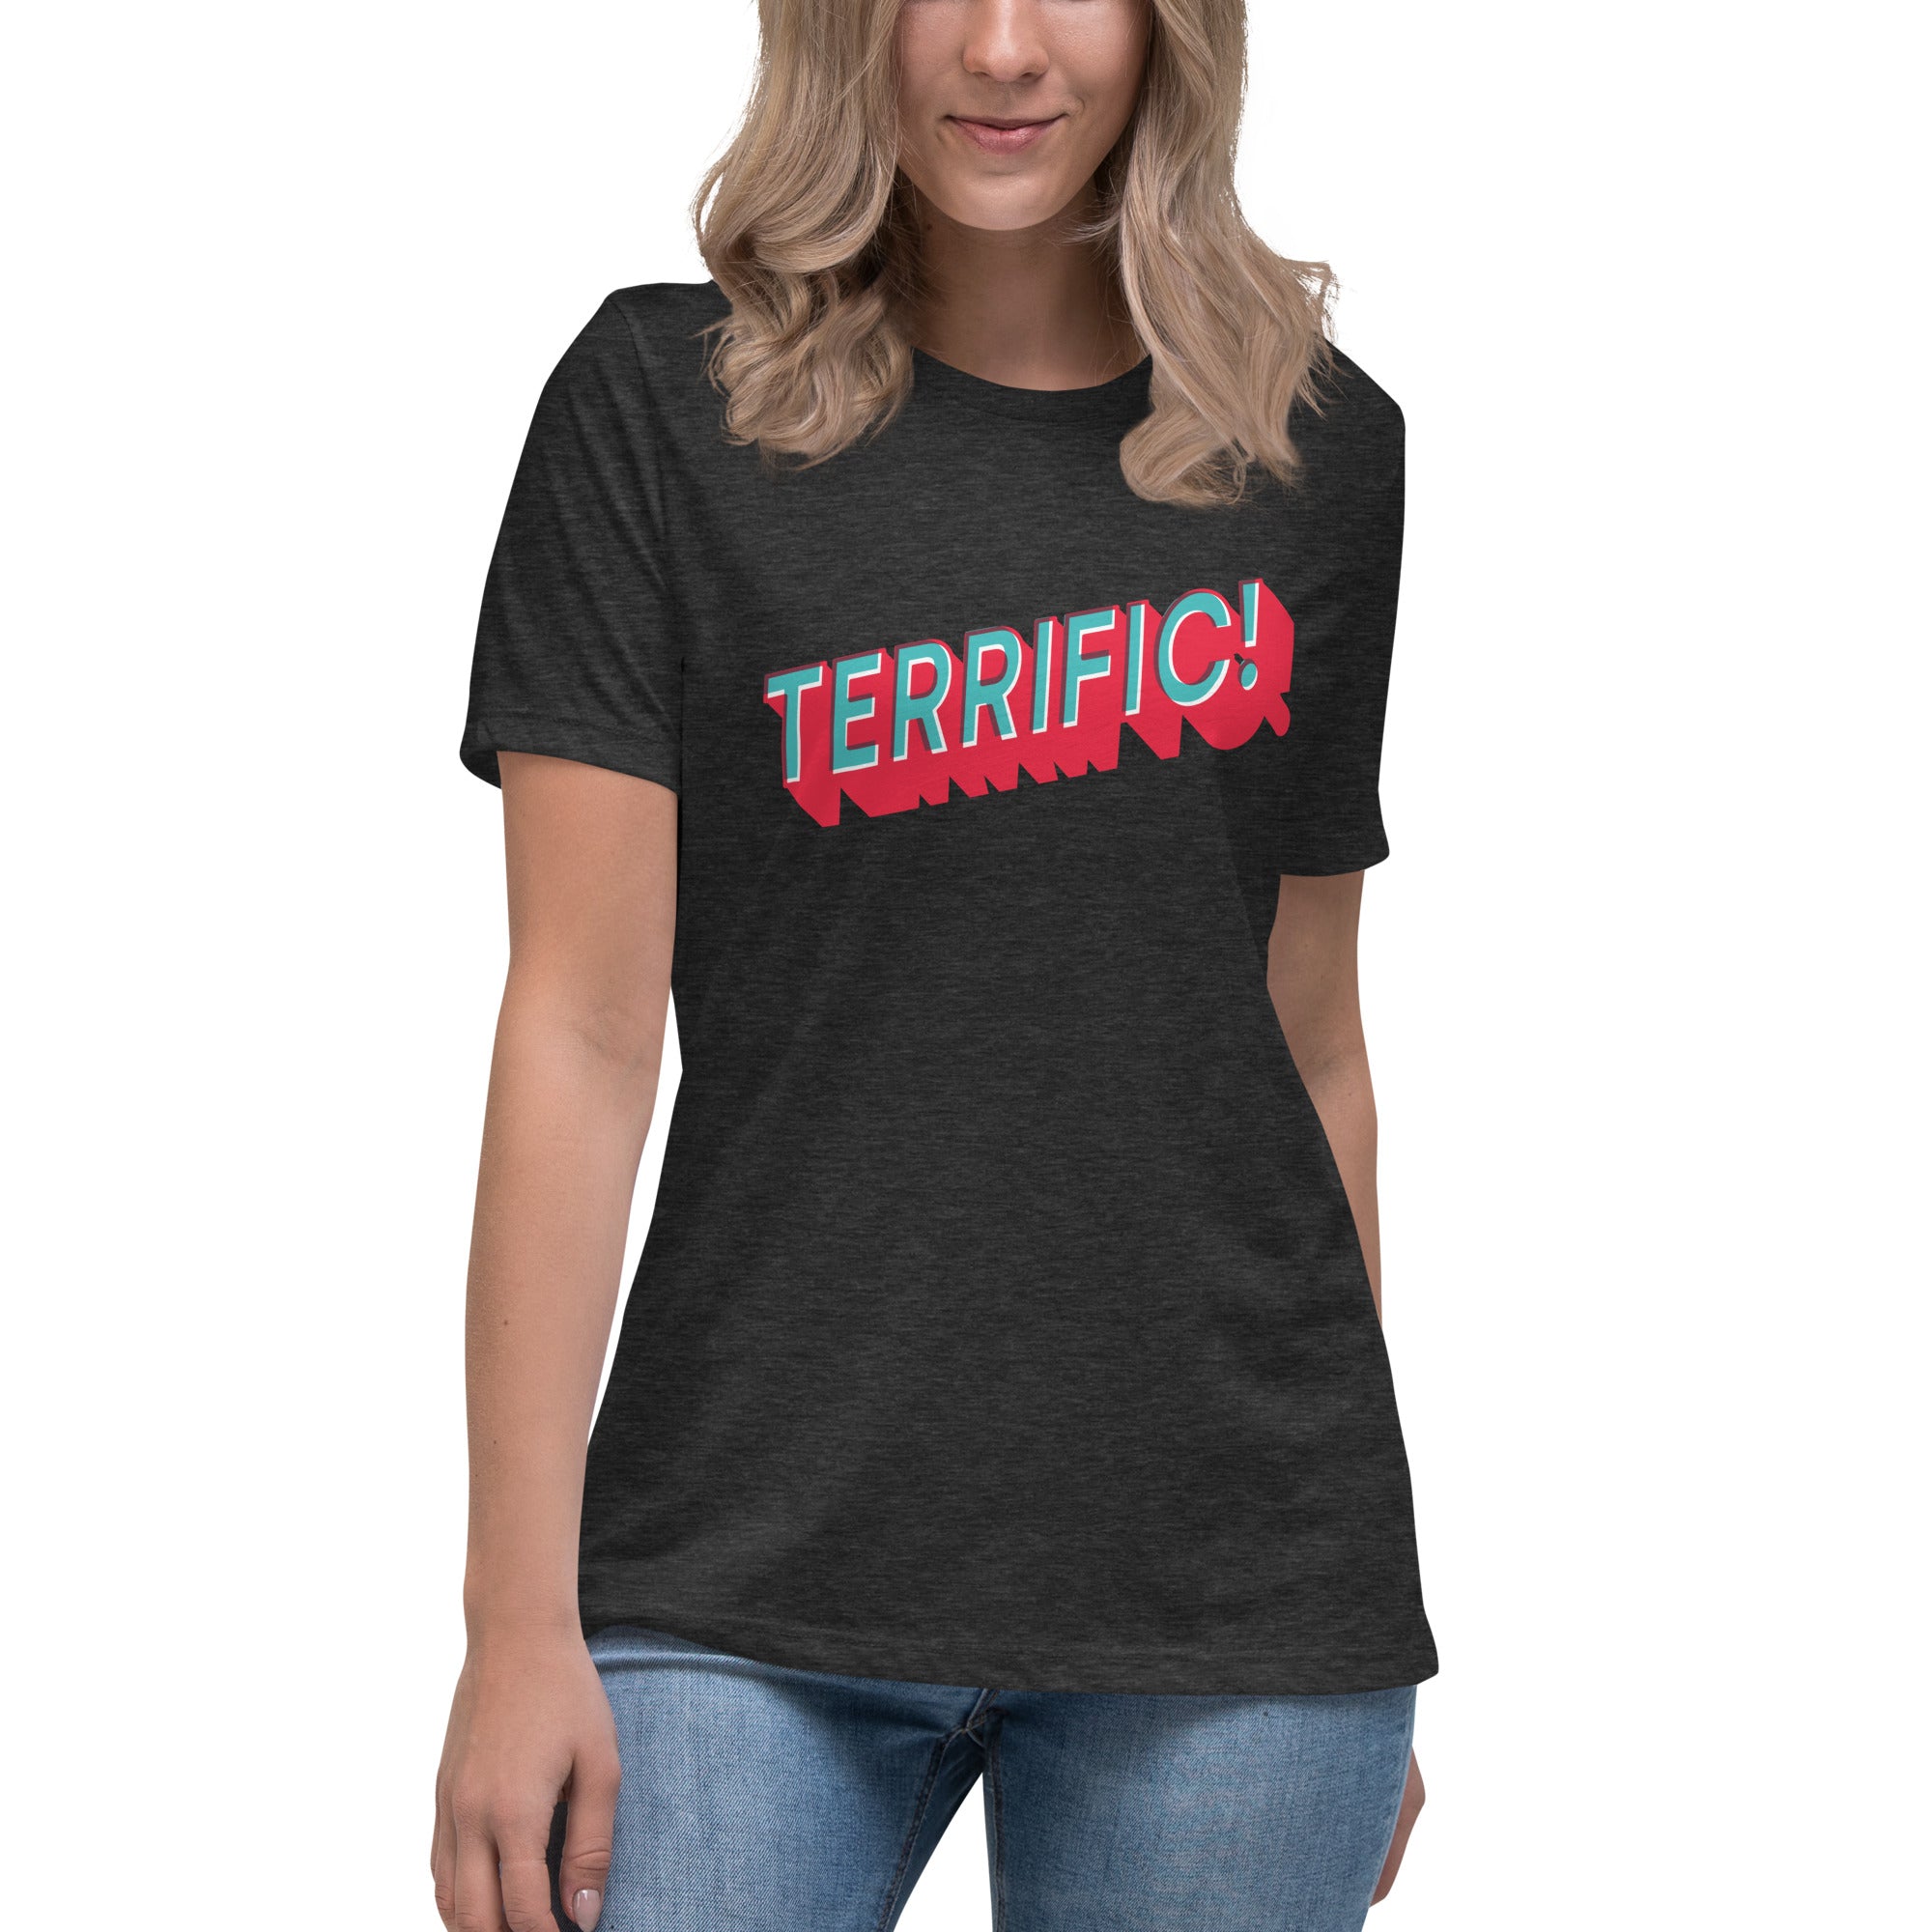 women wearing the word terrific in turquoise and red on a black women's t-shirt